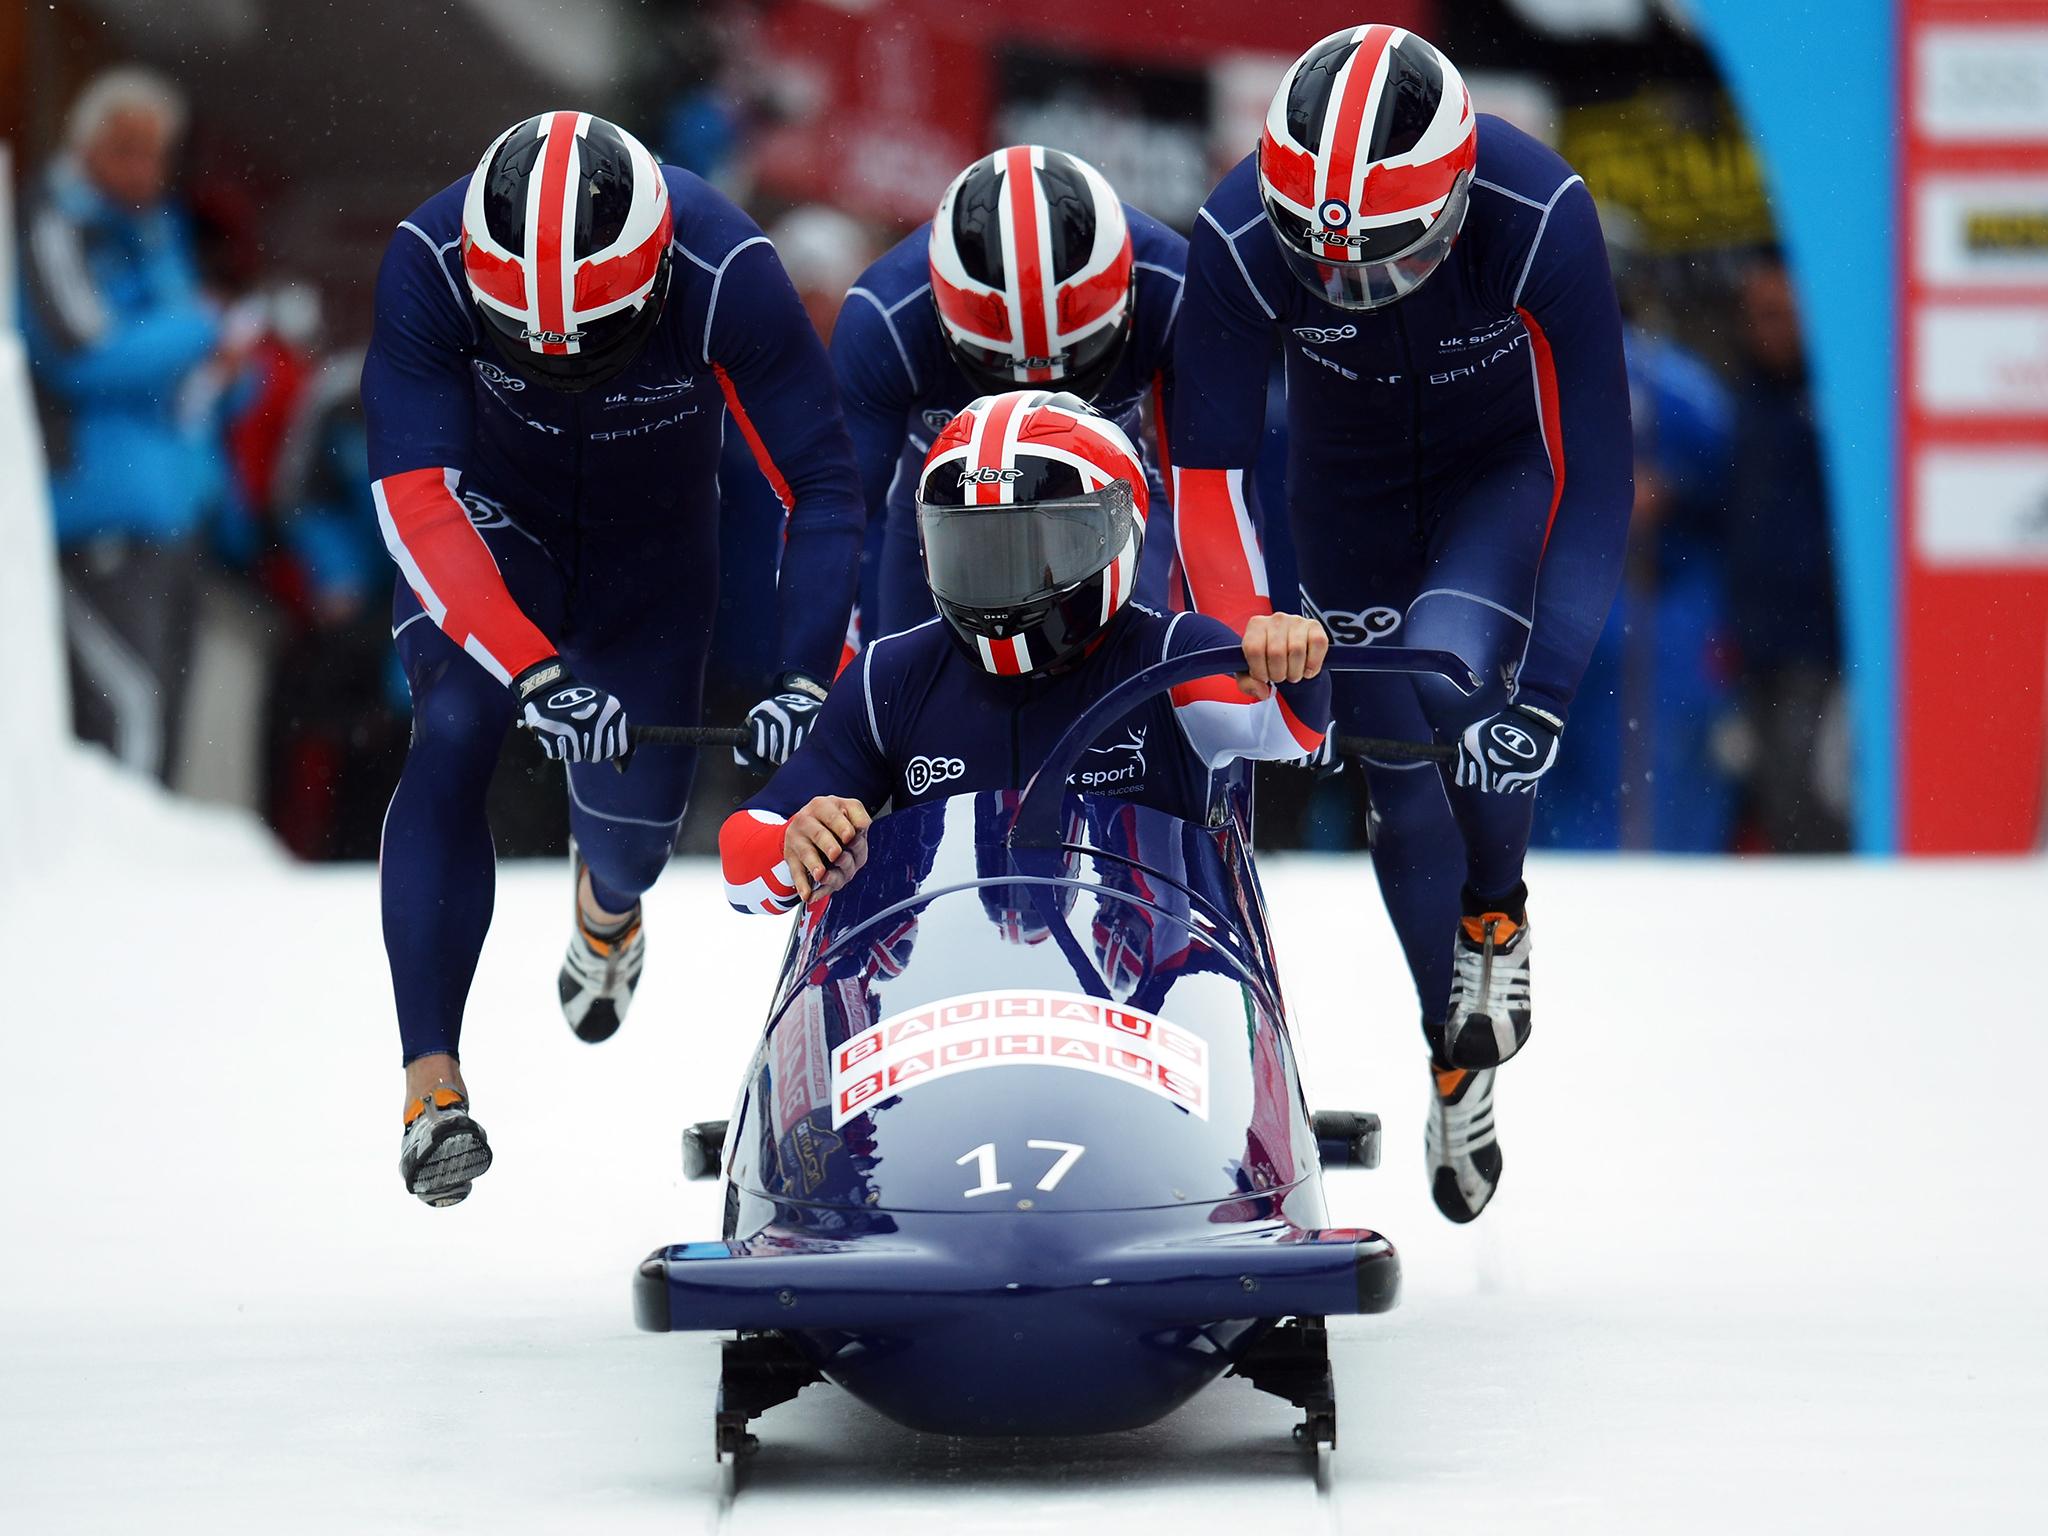 Team GB win bobsleigh bronze medal five years on from Winter Olympics